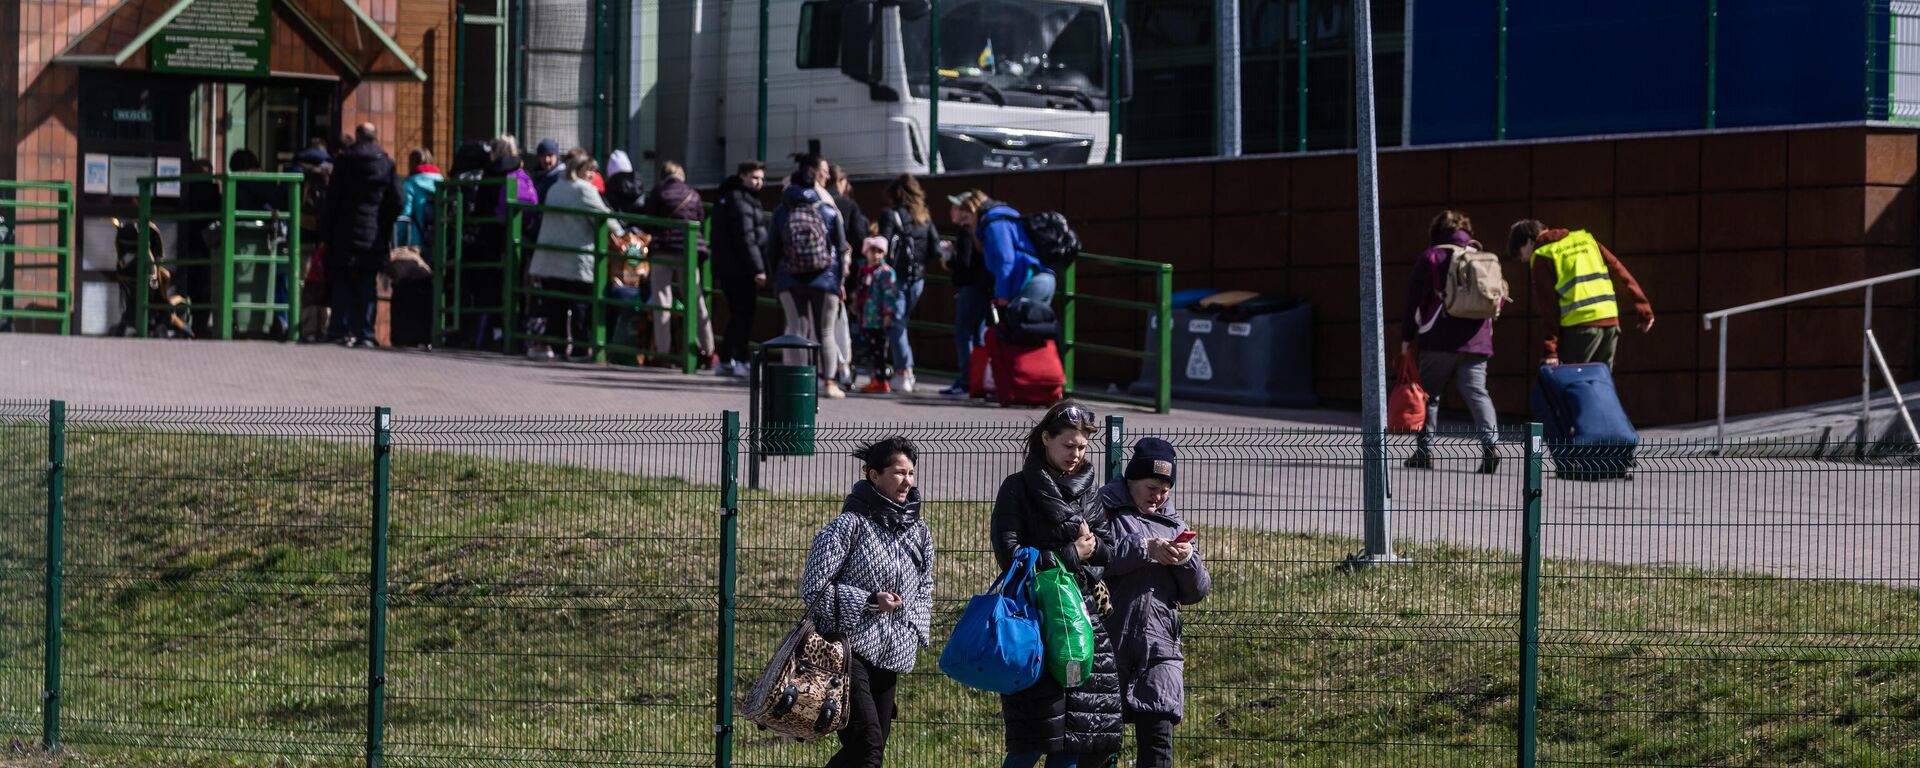 People queue to cross the border on their way back to Ukraine (back) as refugees from Ukraine are seen arriving in Poland (front) at the border crossing in Medyka, southeastern Poland on April 8, 2022. - Sputnik International, 1920, 02.09.2023